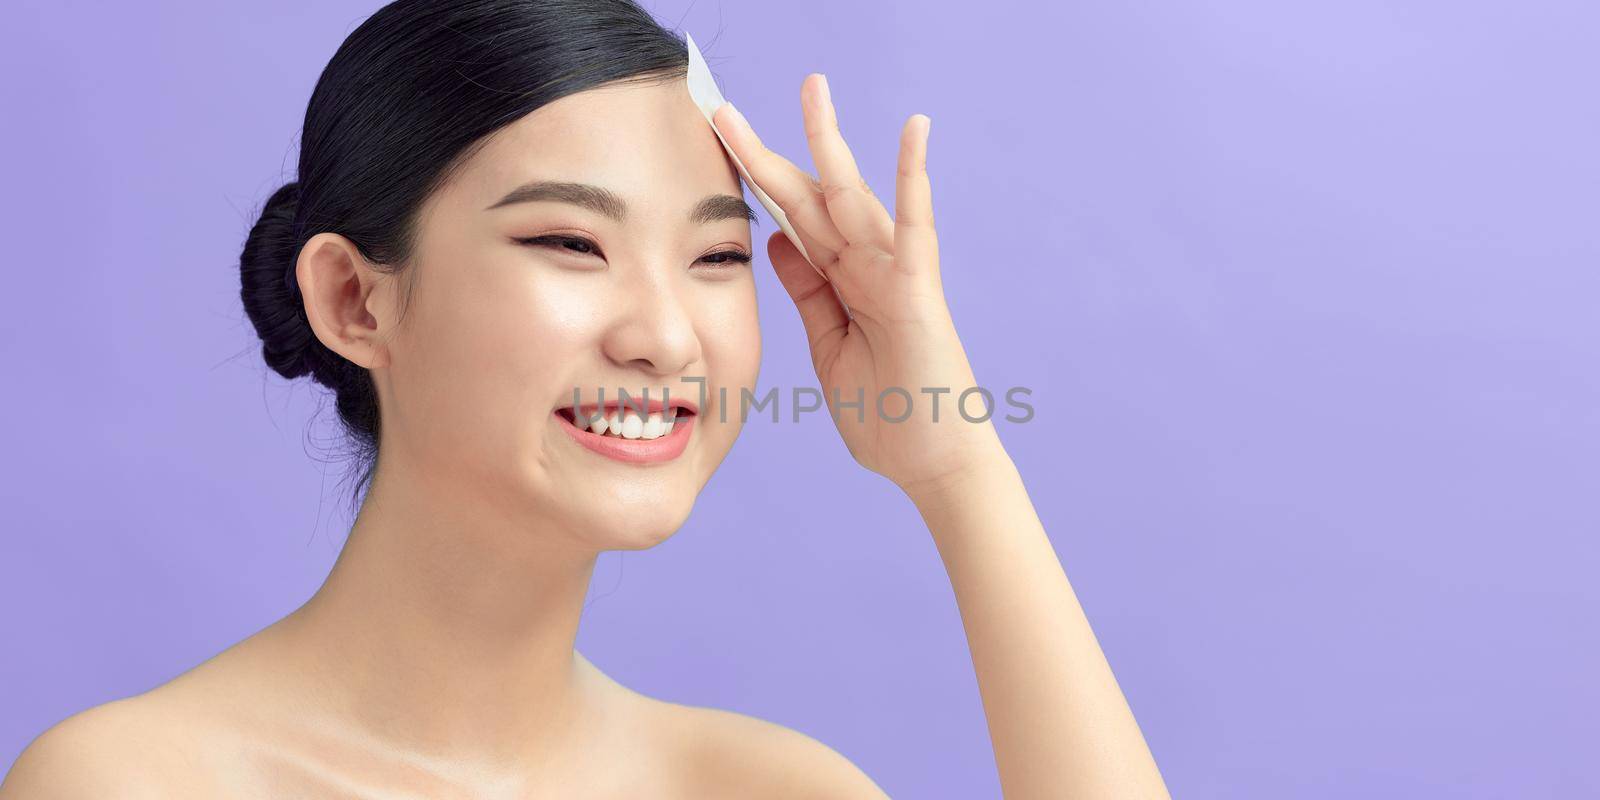 Women with oily skin using oil absorbing sheet on her face by makidotvn